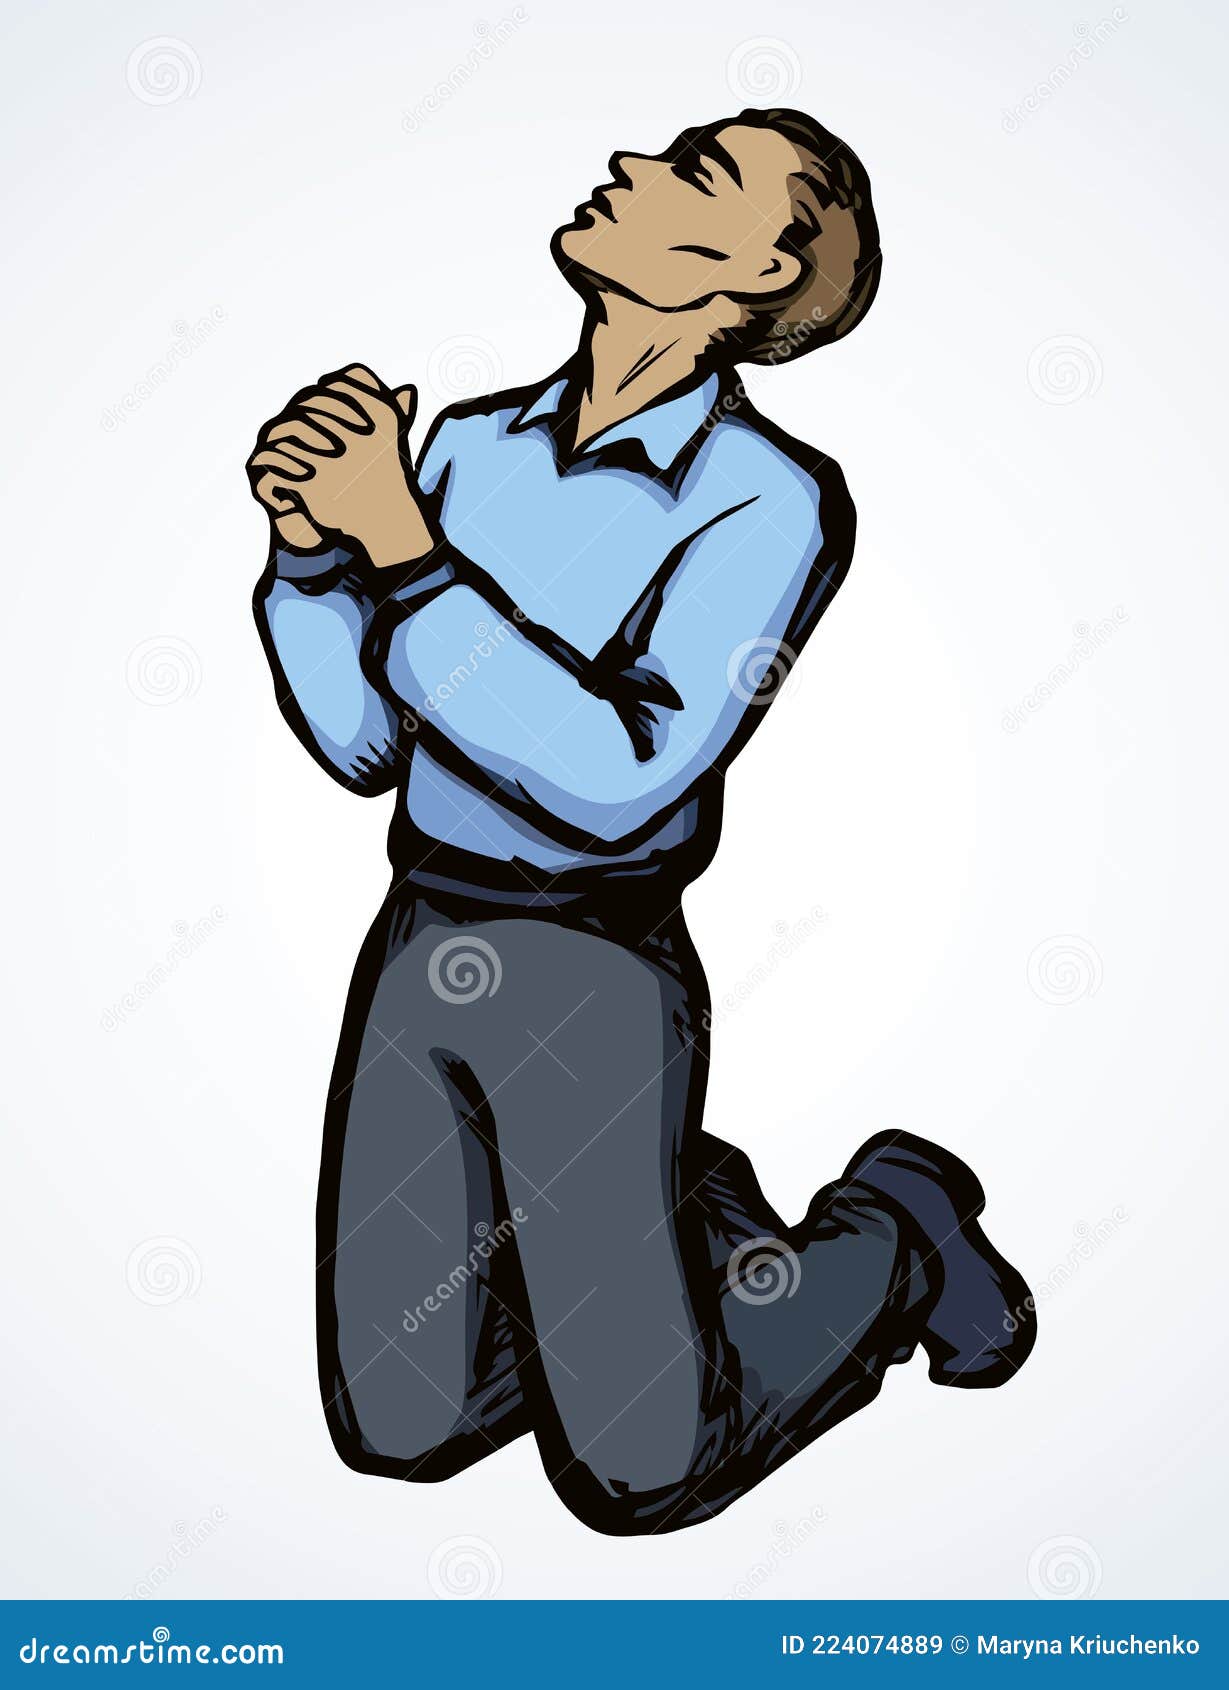 Vector Image of the Praying Person Stock Vector - Illustration of ...